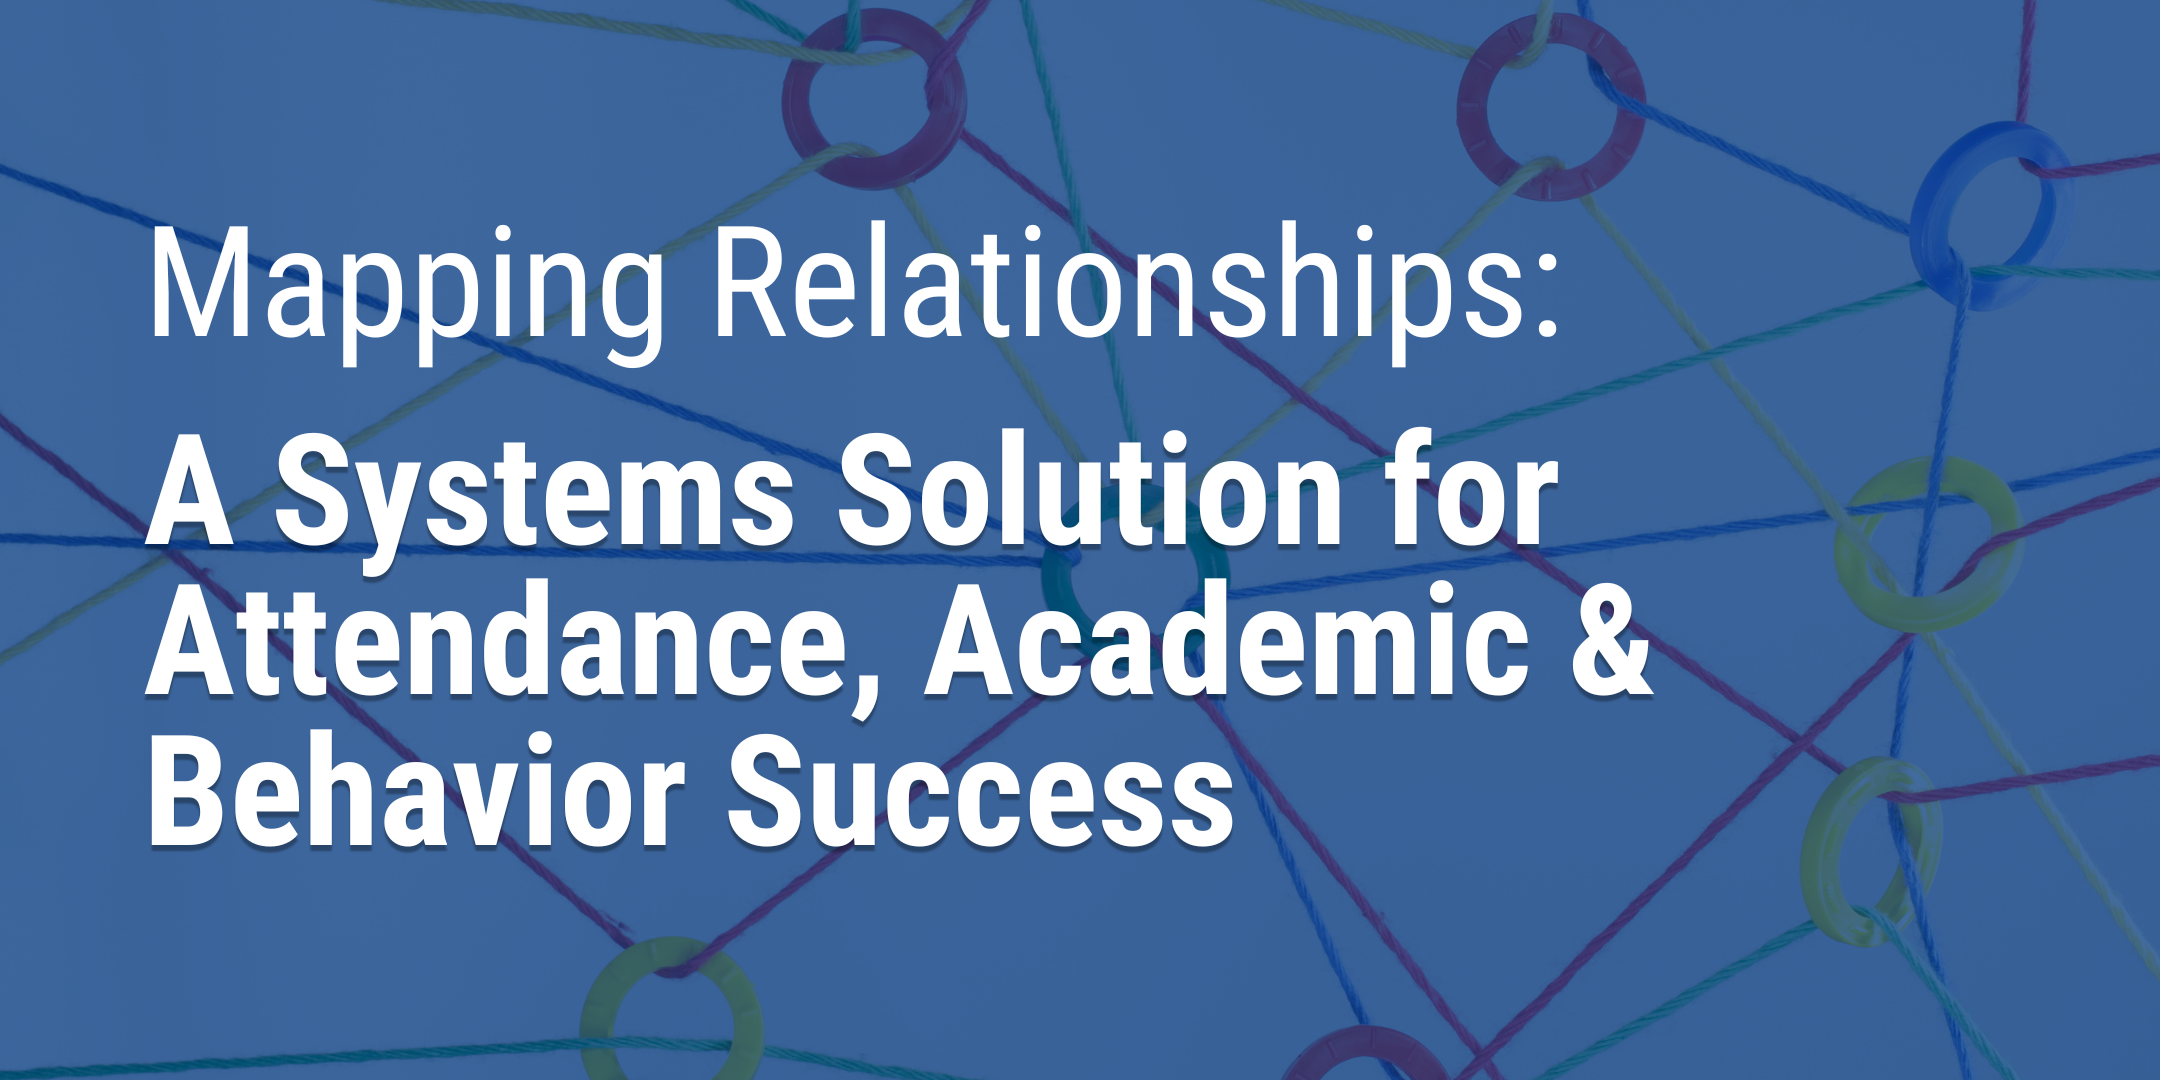 Banner graphic displaying blog title "Mapping Relationships: A Systems Solution for Attendance, Academic & Behavior Success".